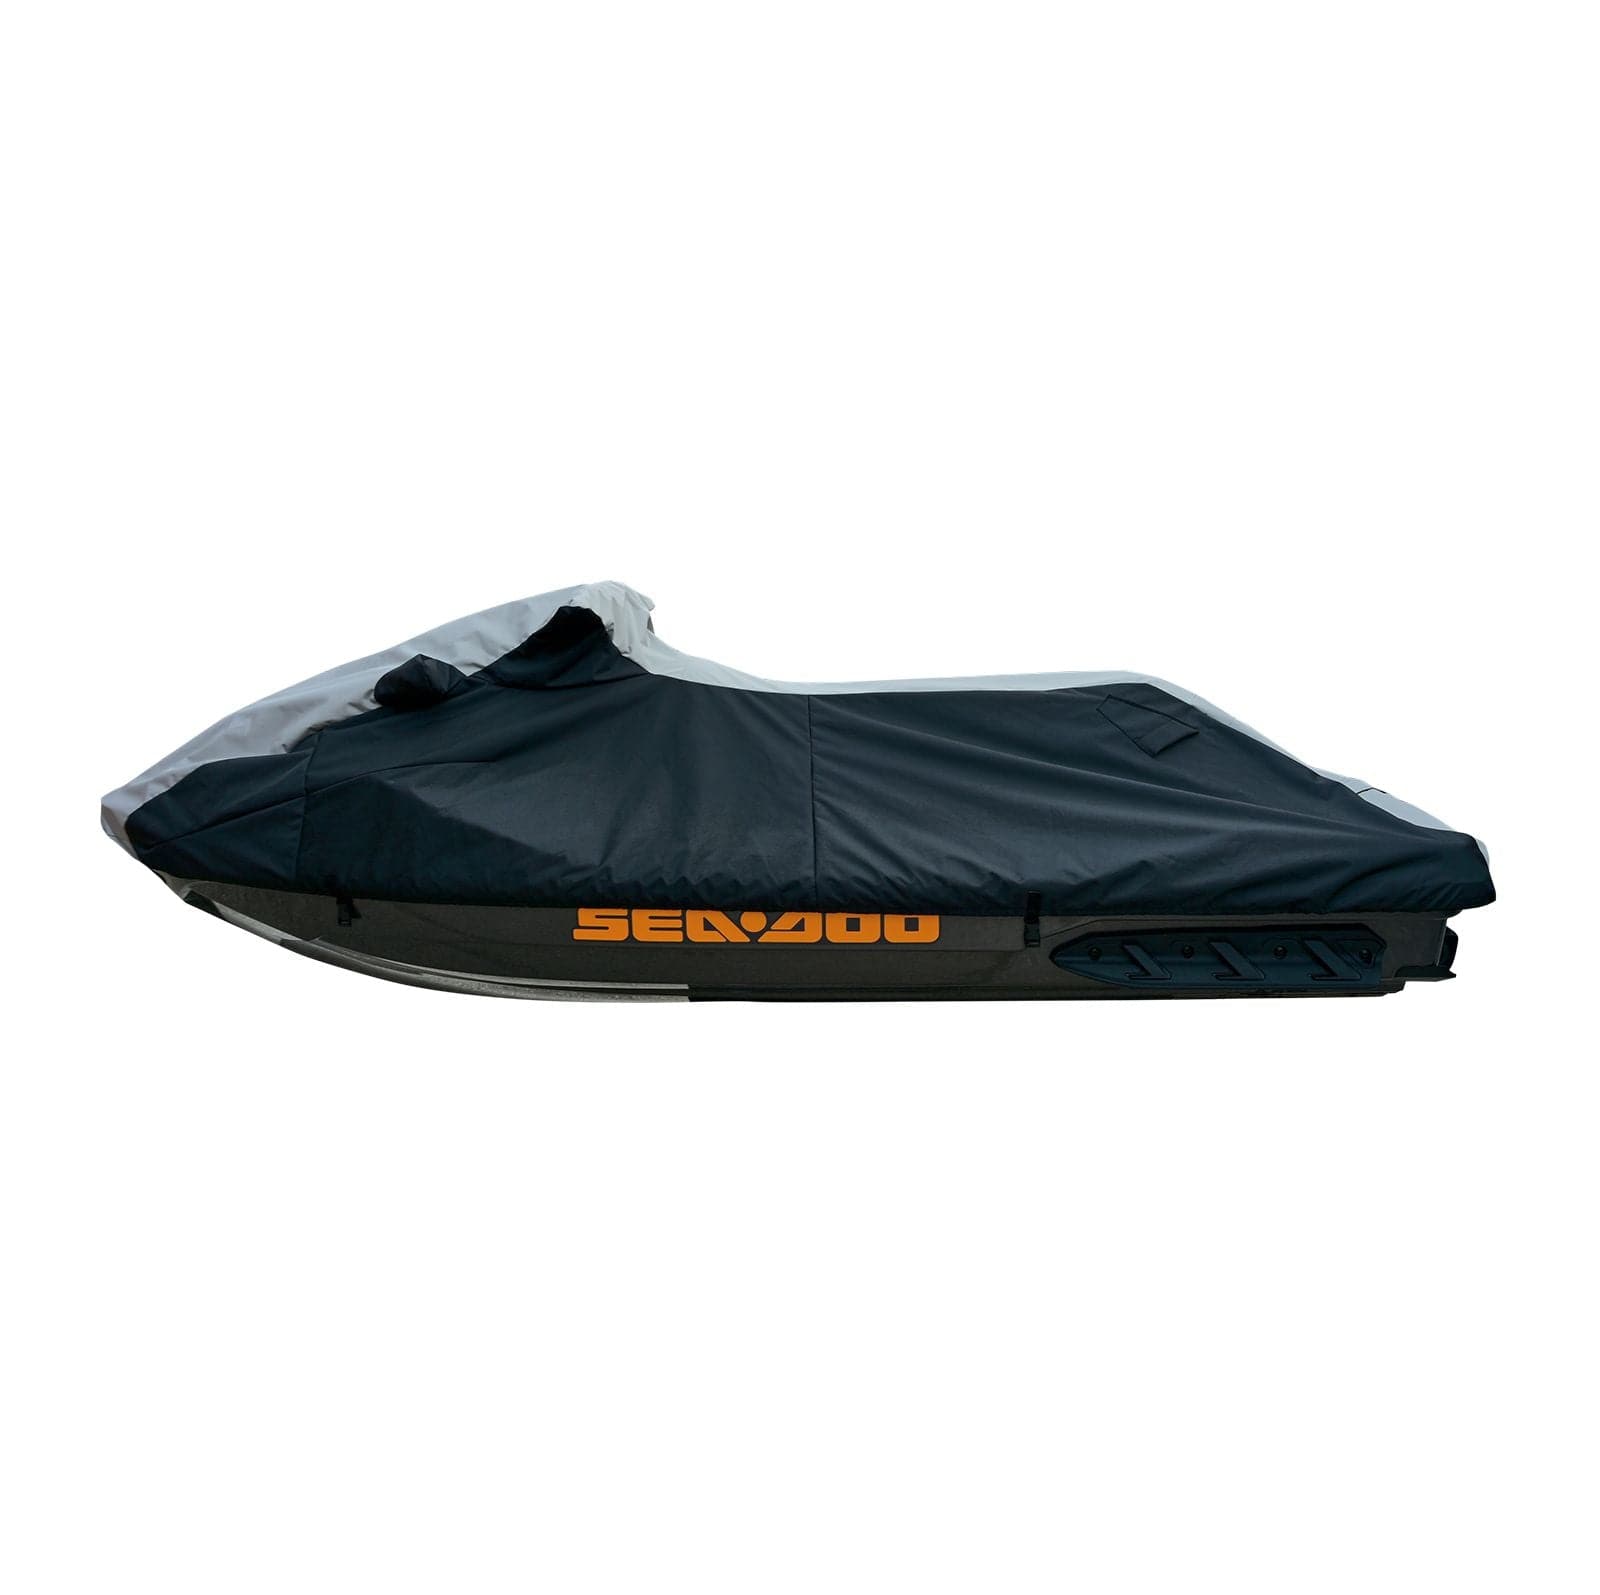 Trailerable Storage cover with vents for Kawasaki 2003-2010 800 SX-R